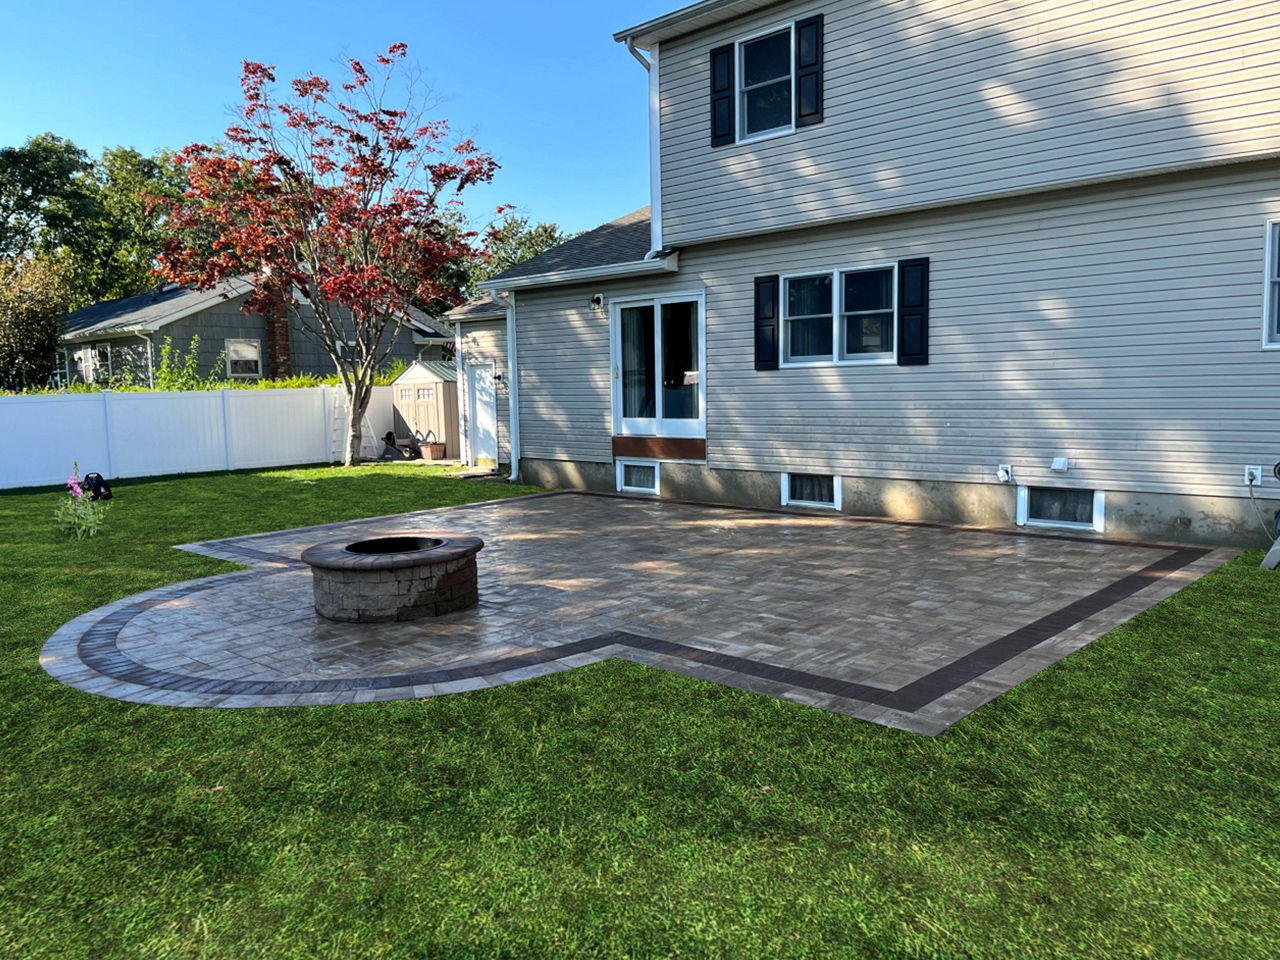 A flagstone patio features a stone-edged fire pit in one corner, great for gathering around on cool evenings.